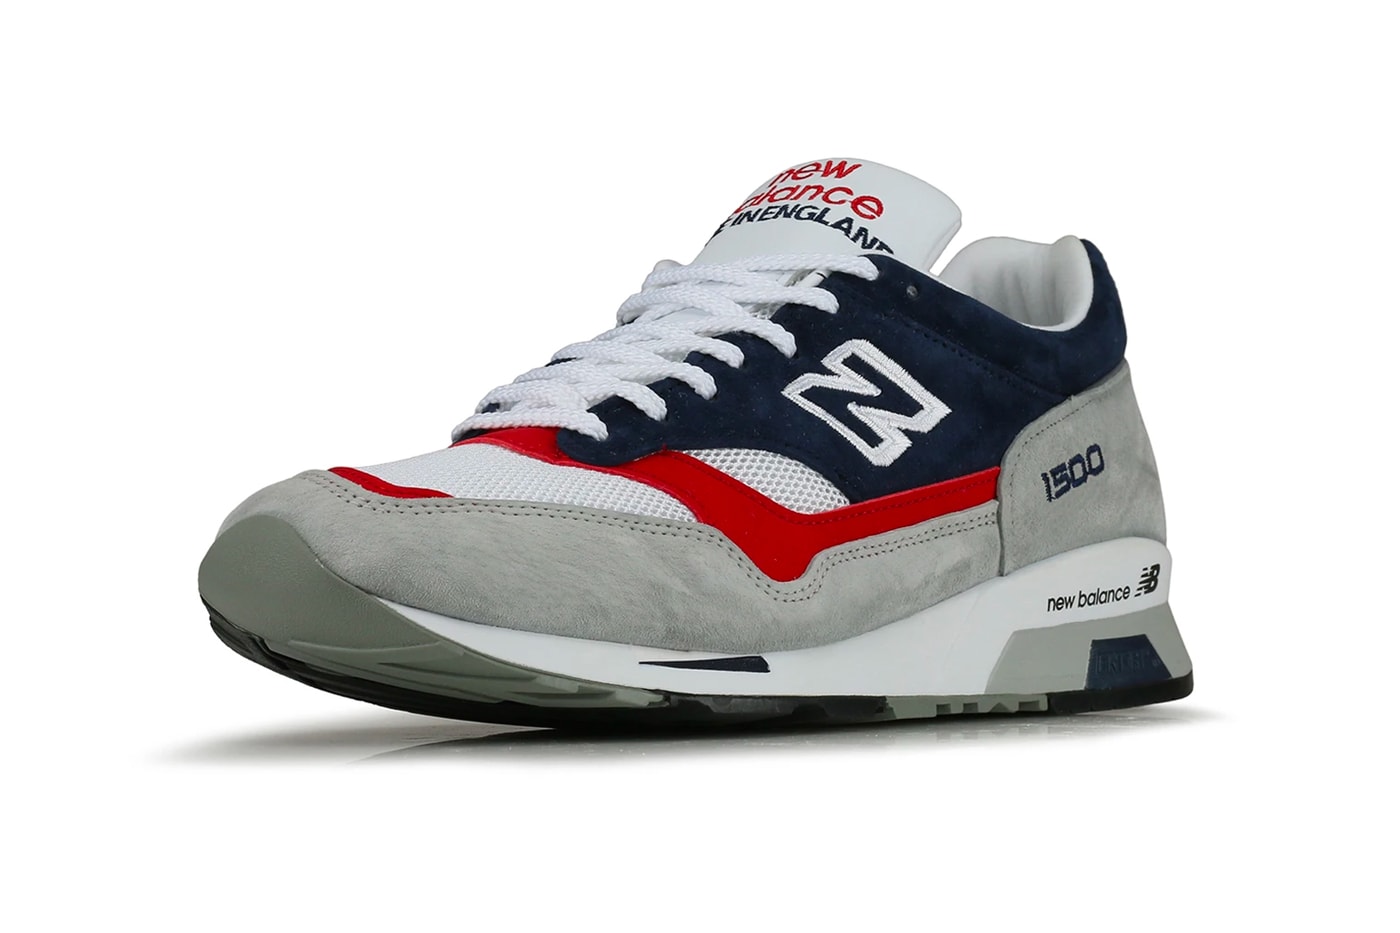 New Balance M1500GWR Gray Blue shoes Fearlessly Independent Since 1906 footwear sneakers menswear streetwear trainers runners kicks spring summer 2020 collection 